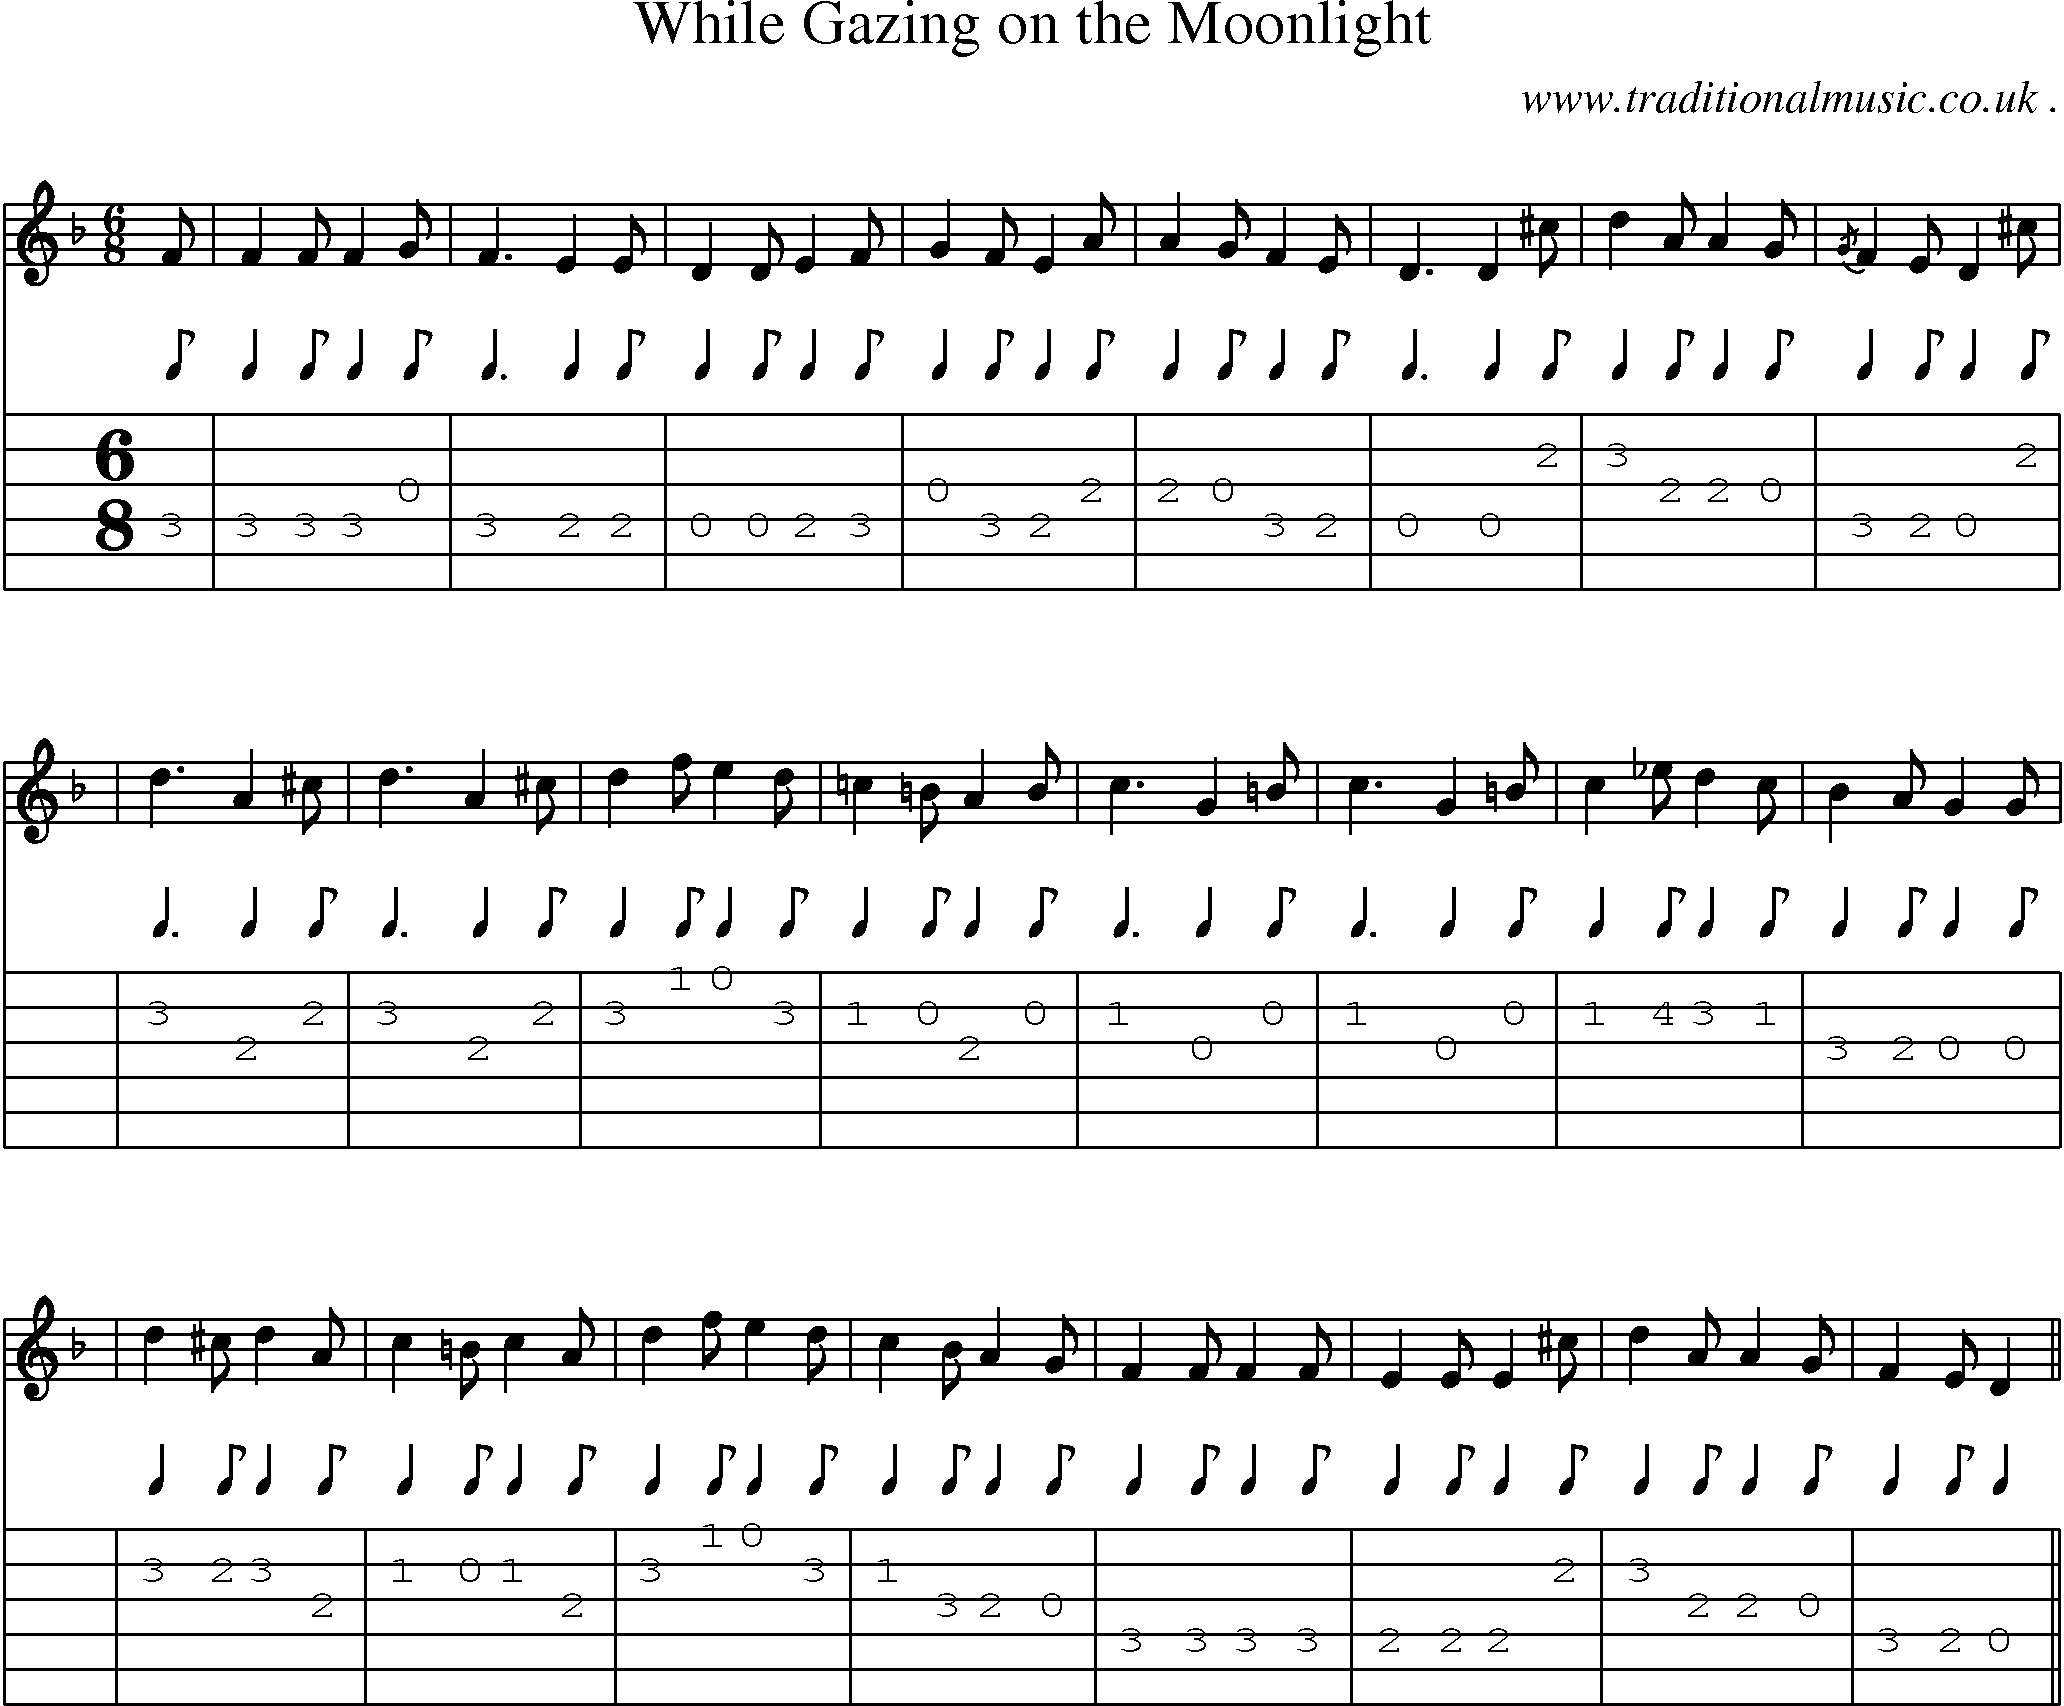 Sheet-music  score, Chords and Guitar Tabs for While Gazing On The Moonlight